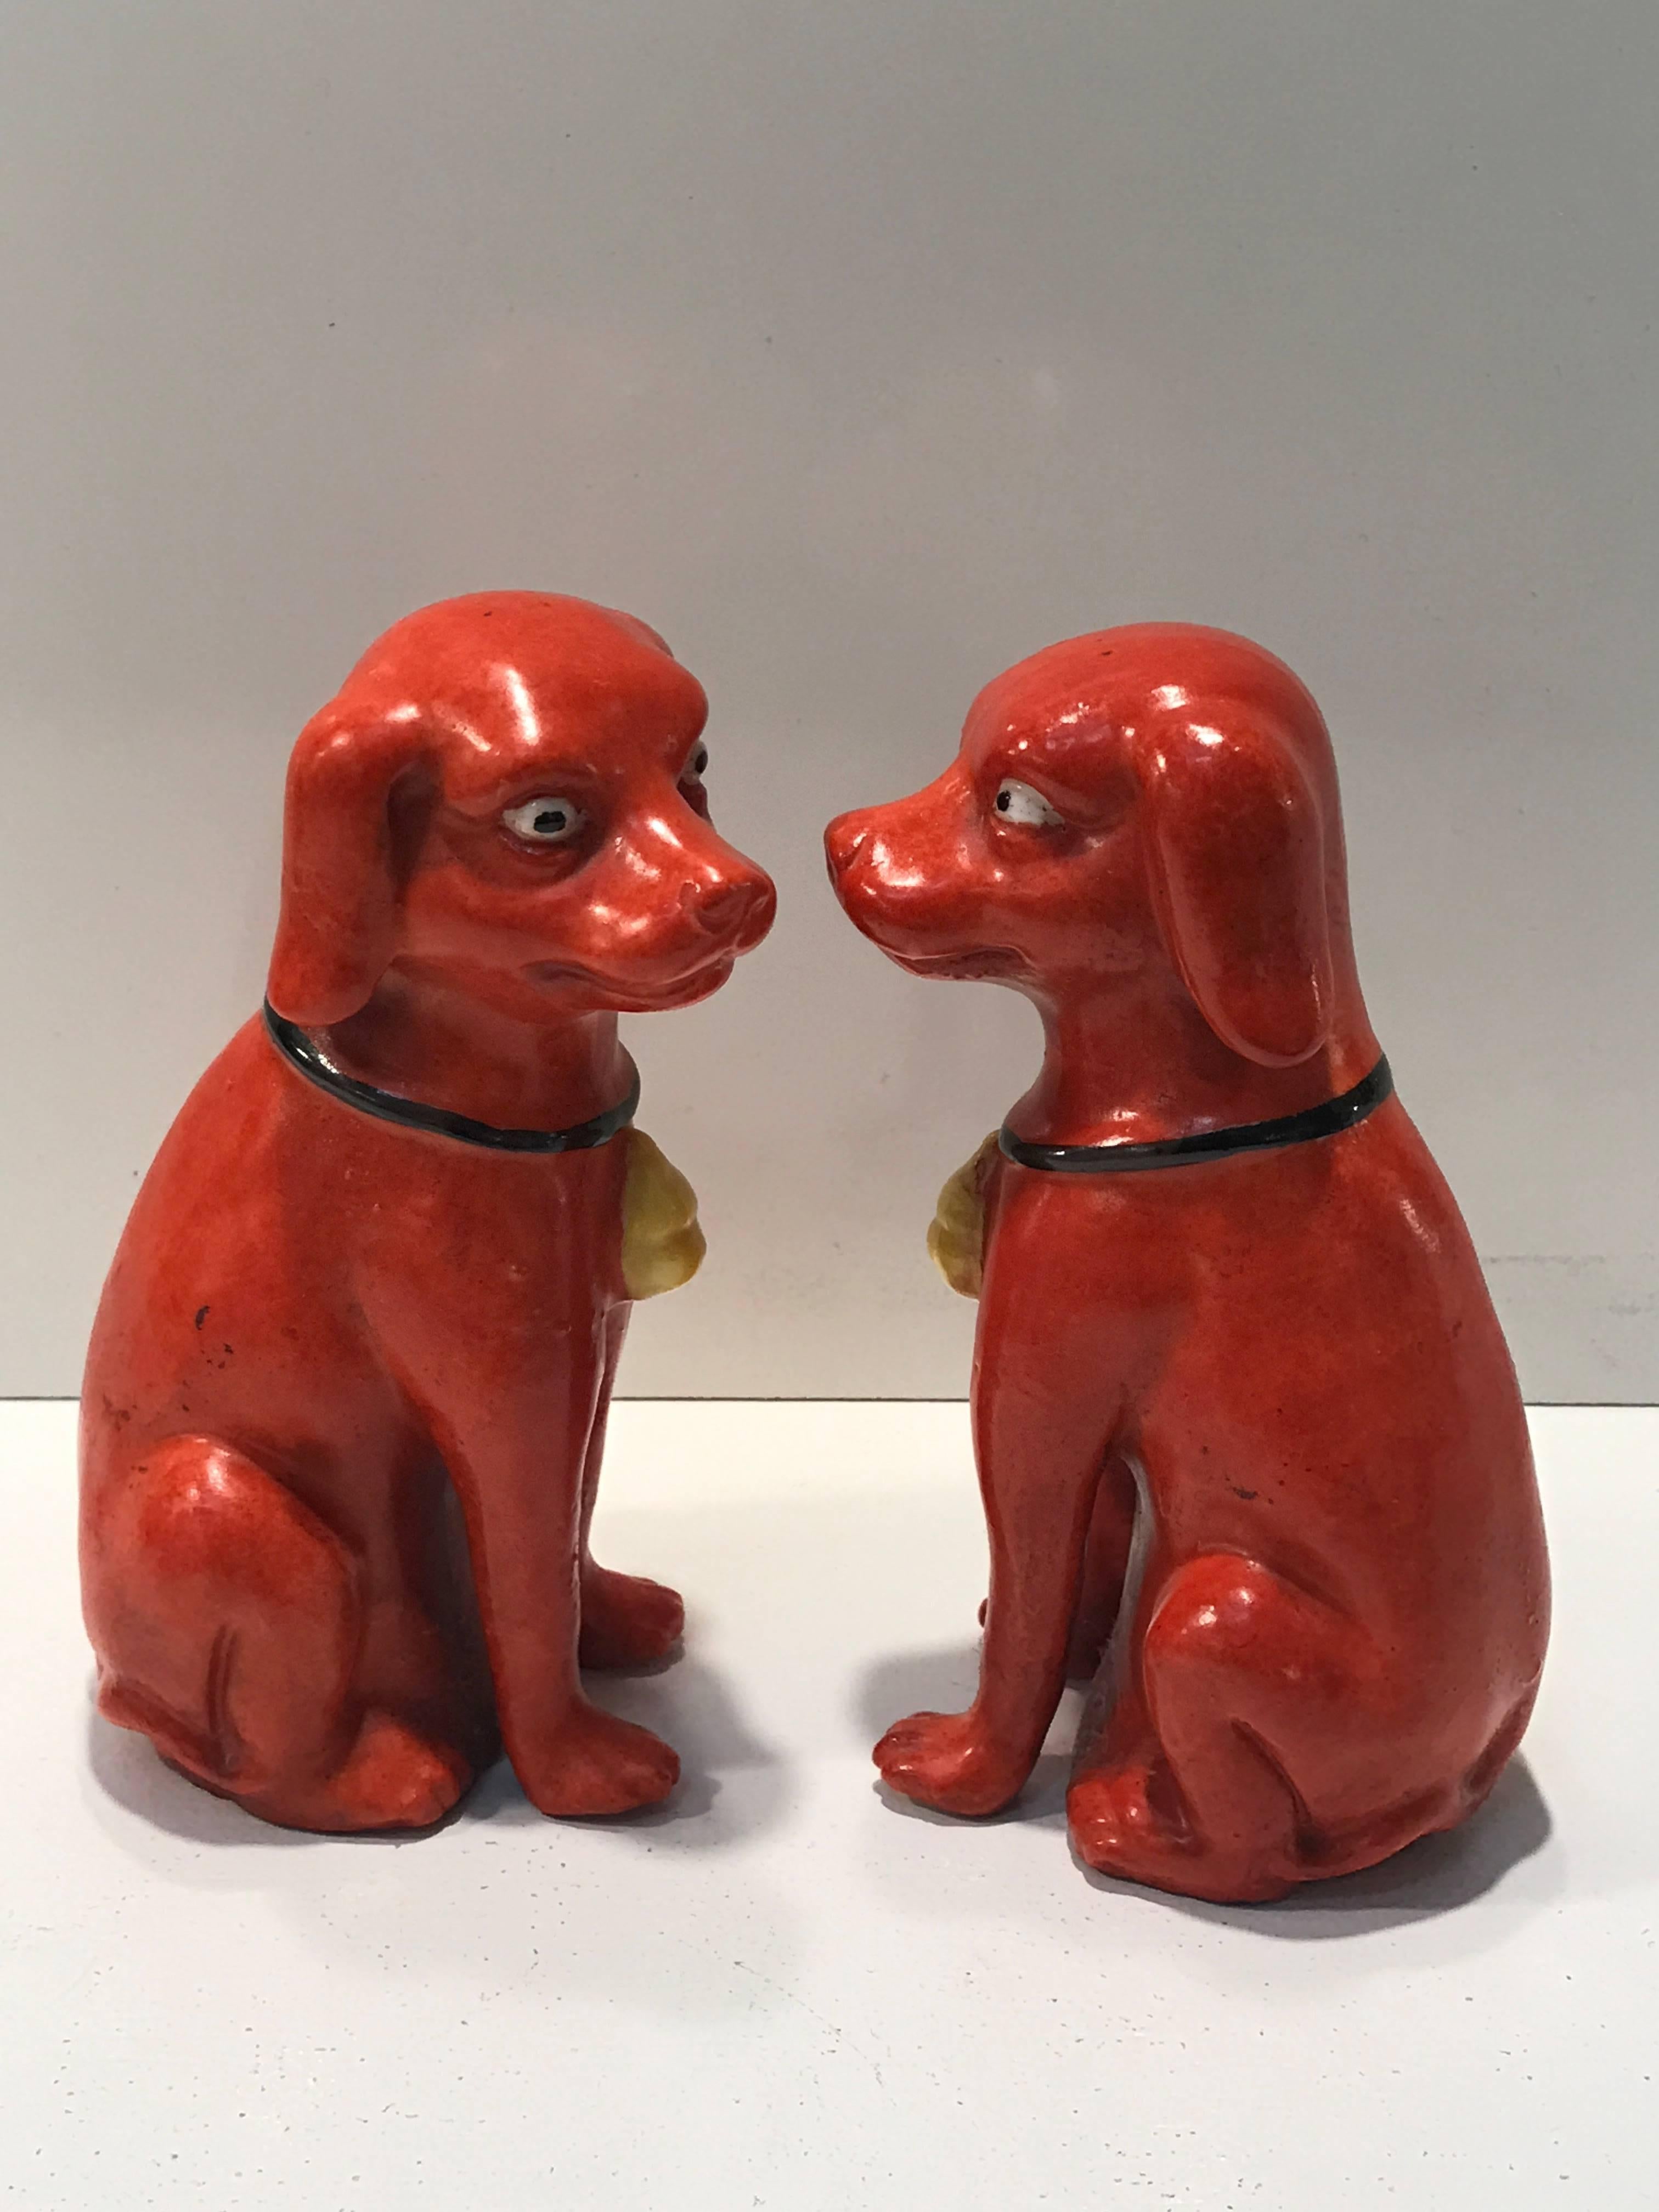 Rare pair of Famille Verte Chinese Export seated dogs, each one in iron red glaze with expressive faces and dog collars.
This item is at our Atlanta GA, Location, not Palm Beach.
